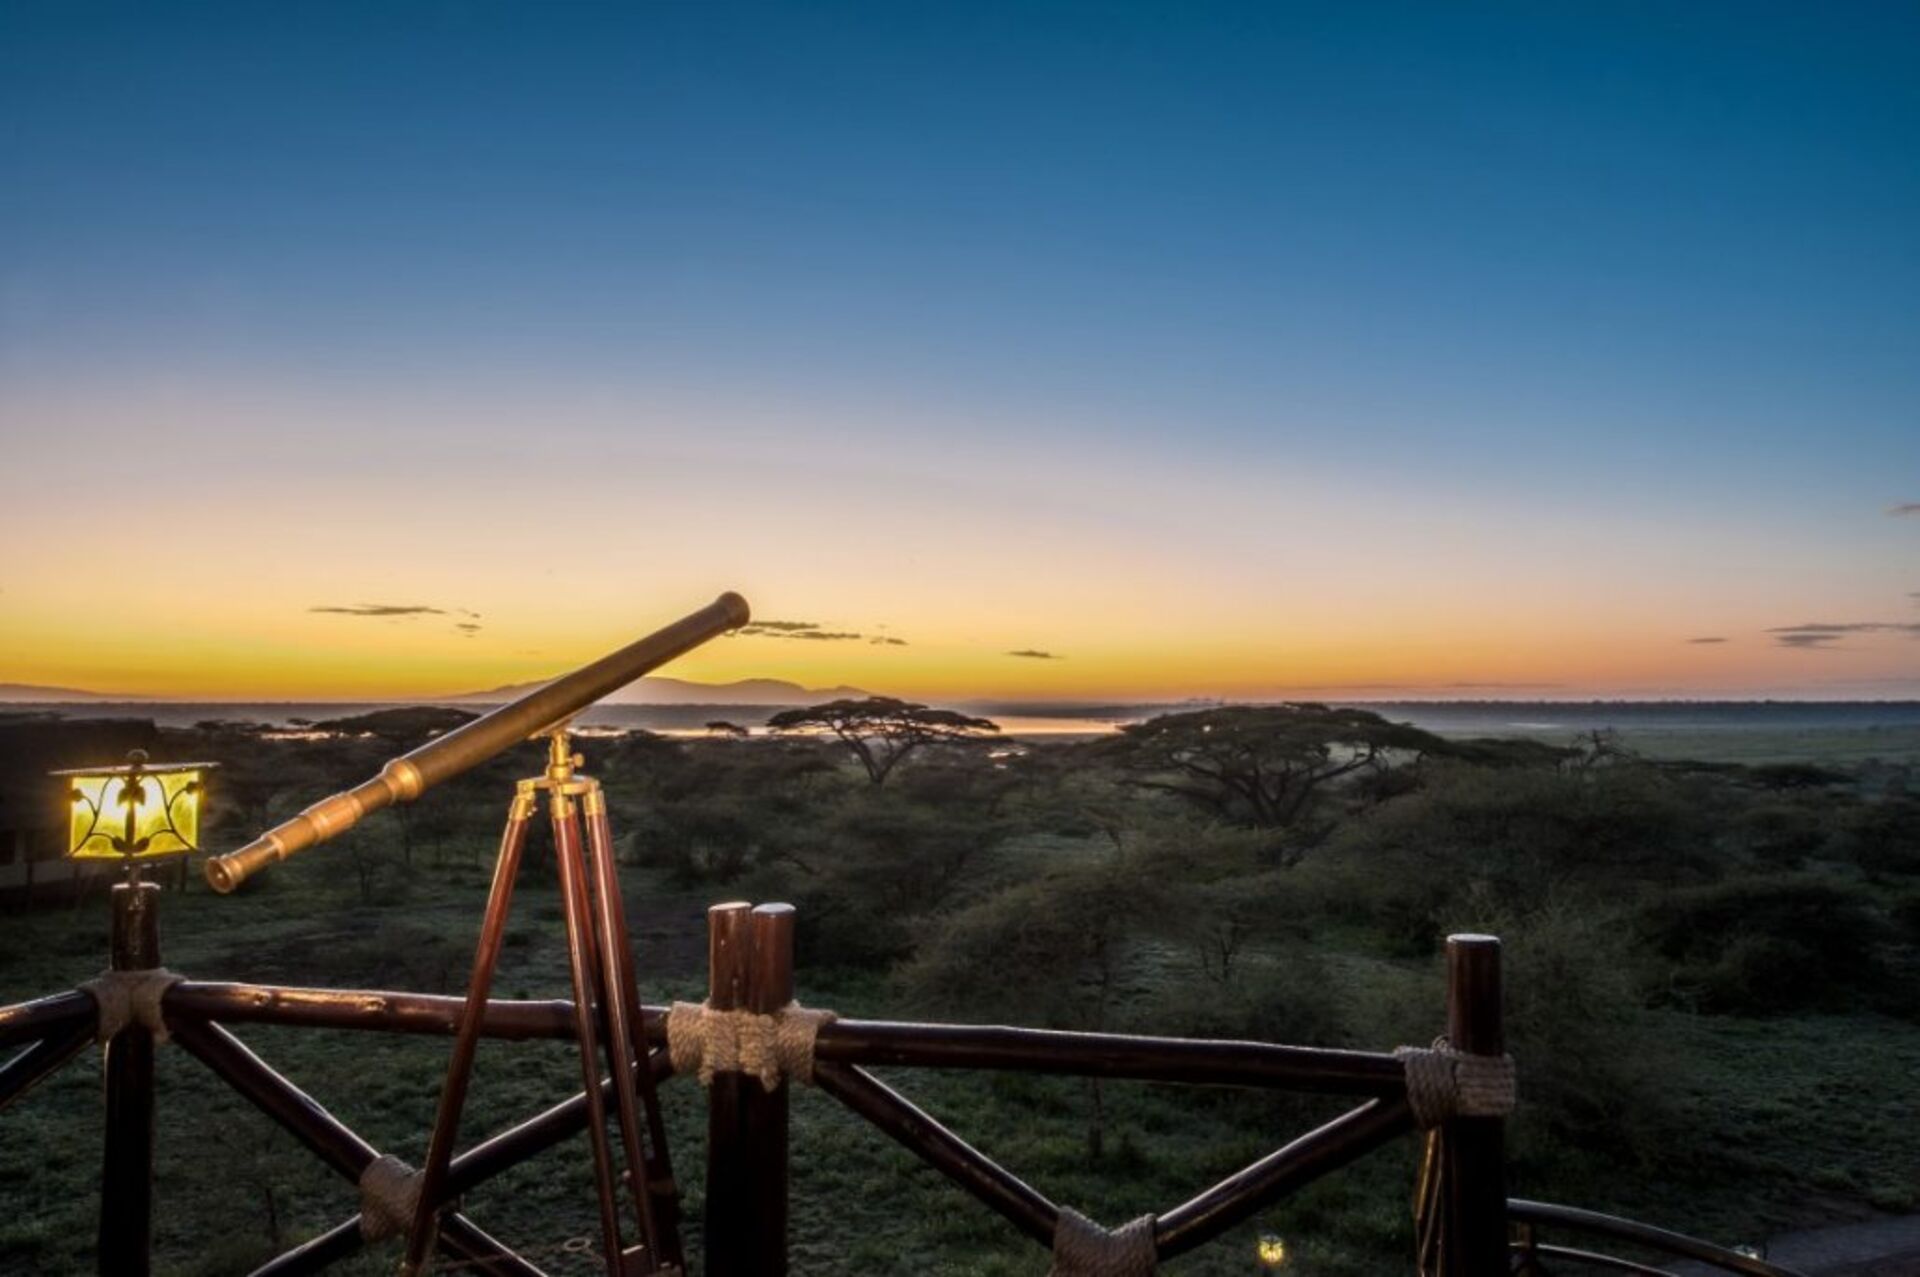 Southern Serengeti – Recommended Dec-Mar